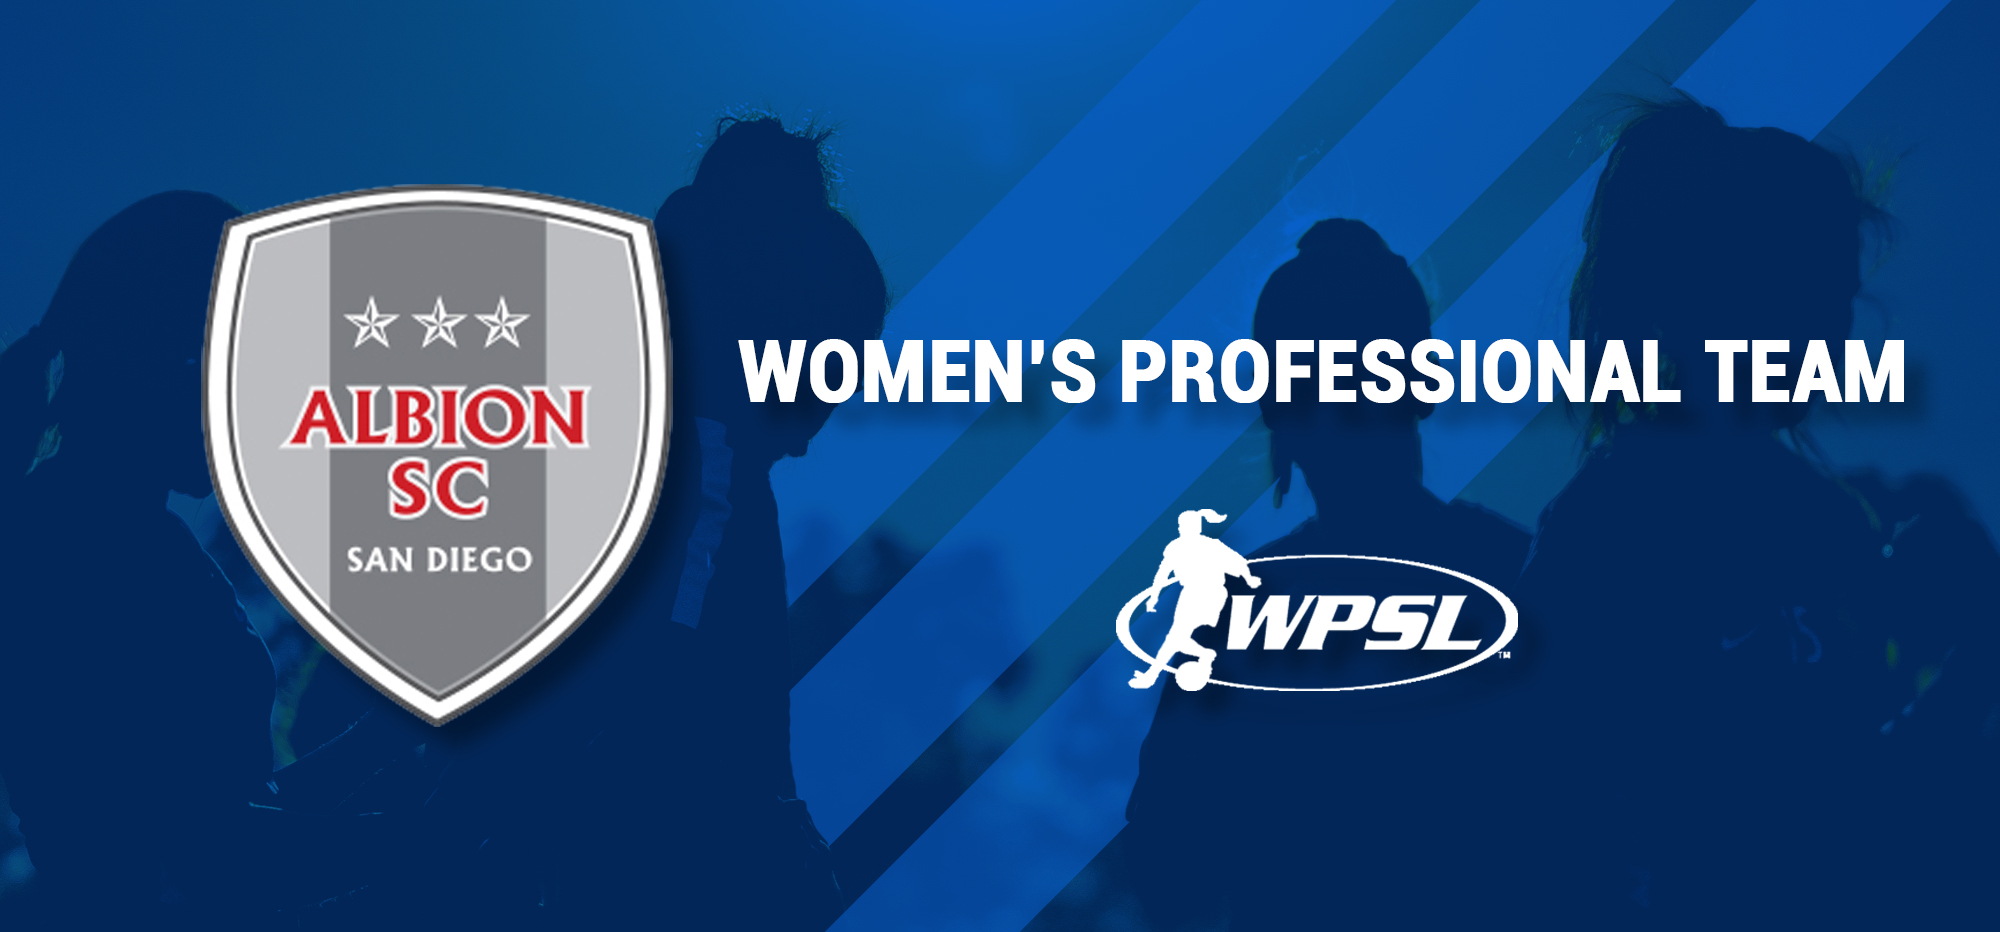 ALBION SC WILL NOW HAVE A WOMENS PROFESSIONAL TEAM TO SIT ATOP THE GIRLS US DEVELOPMENT ACADEMY